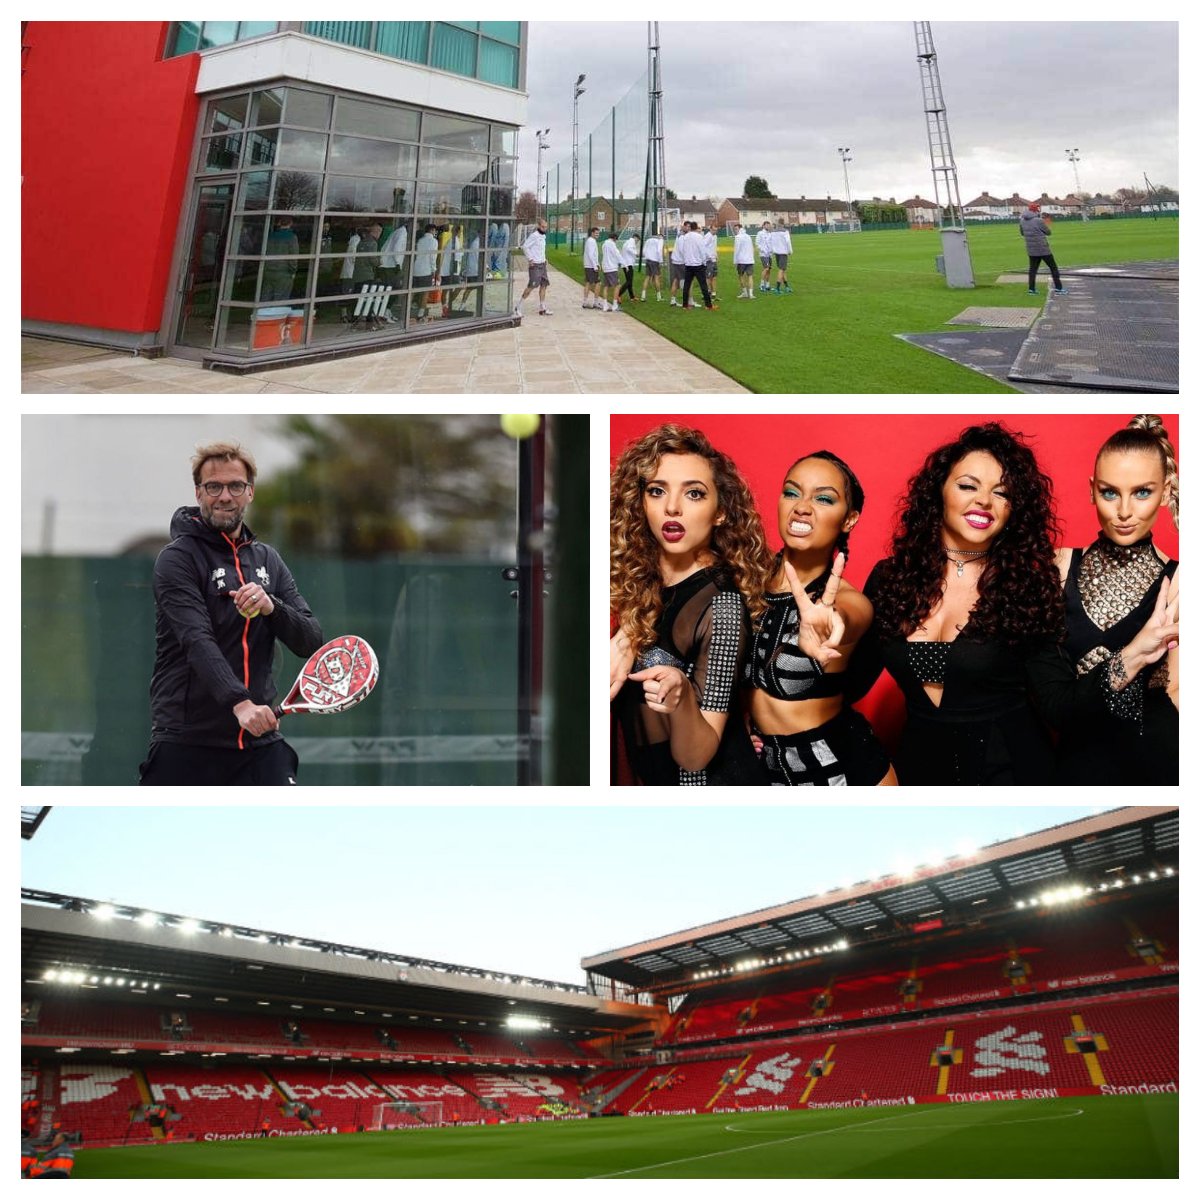 Paddle with Jurgen Klopp, @LittleMix meet & greet, exclusive use of Melwood or the ultimate @LFC Anfield experience? These are just some of the amazing prizes up for auction at next week’s #JMF Charity Ball!